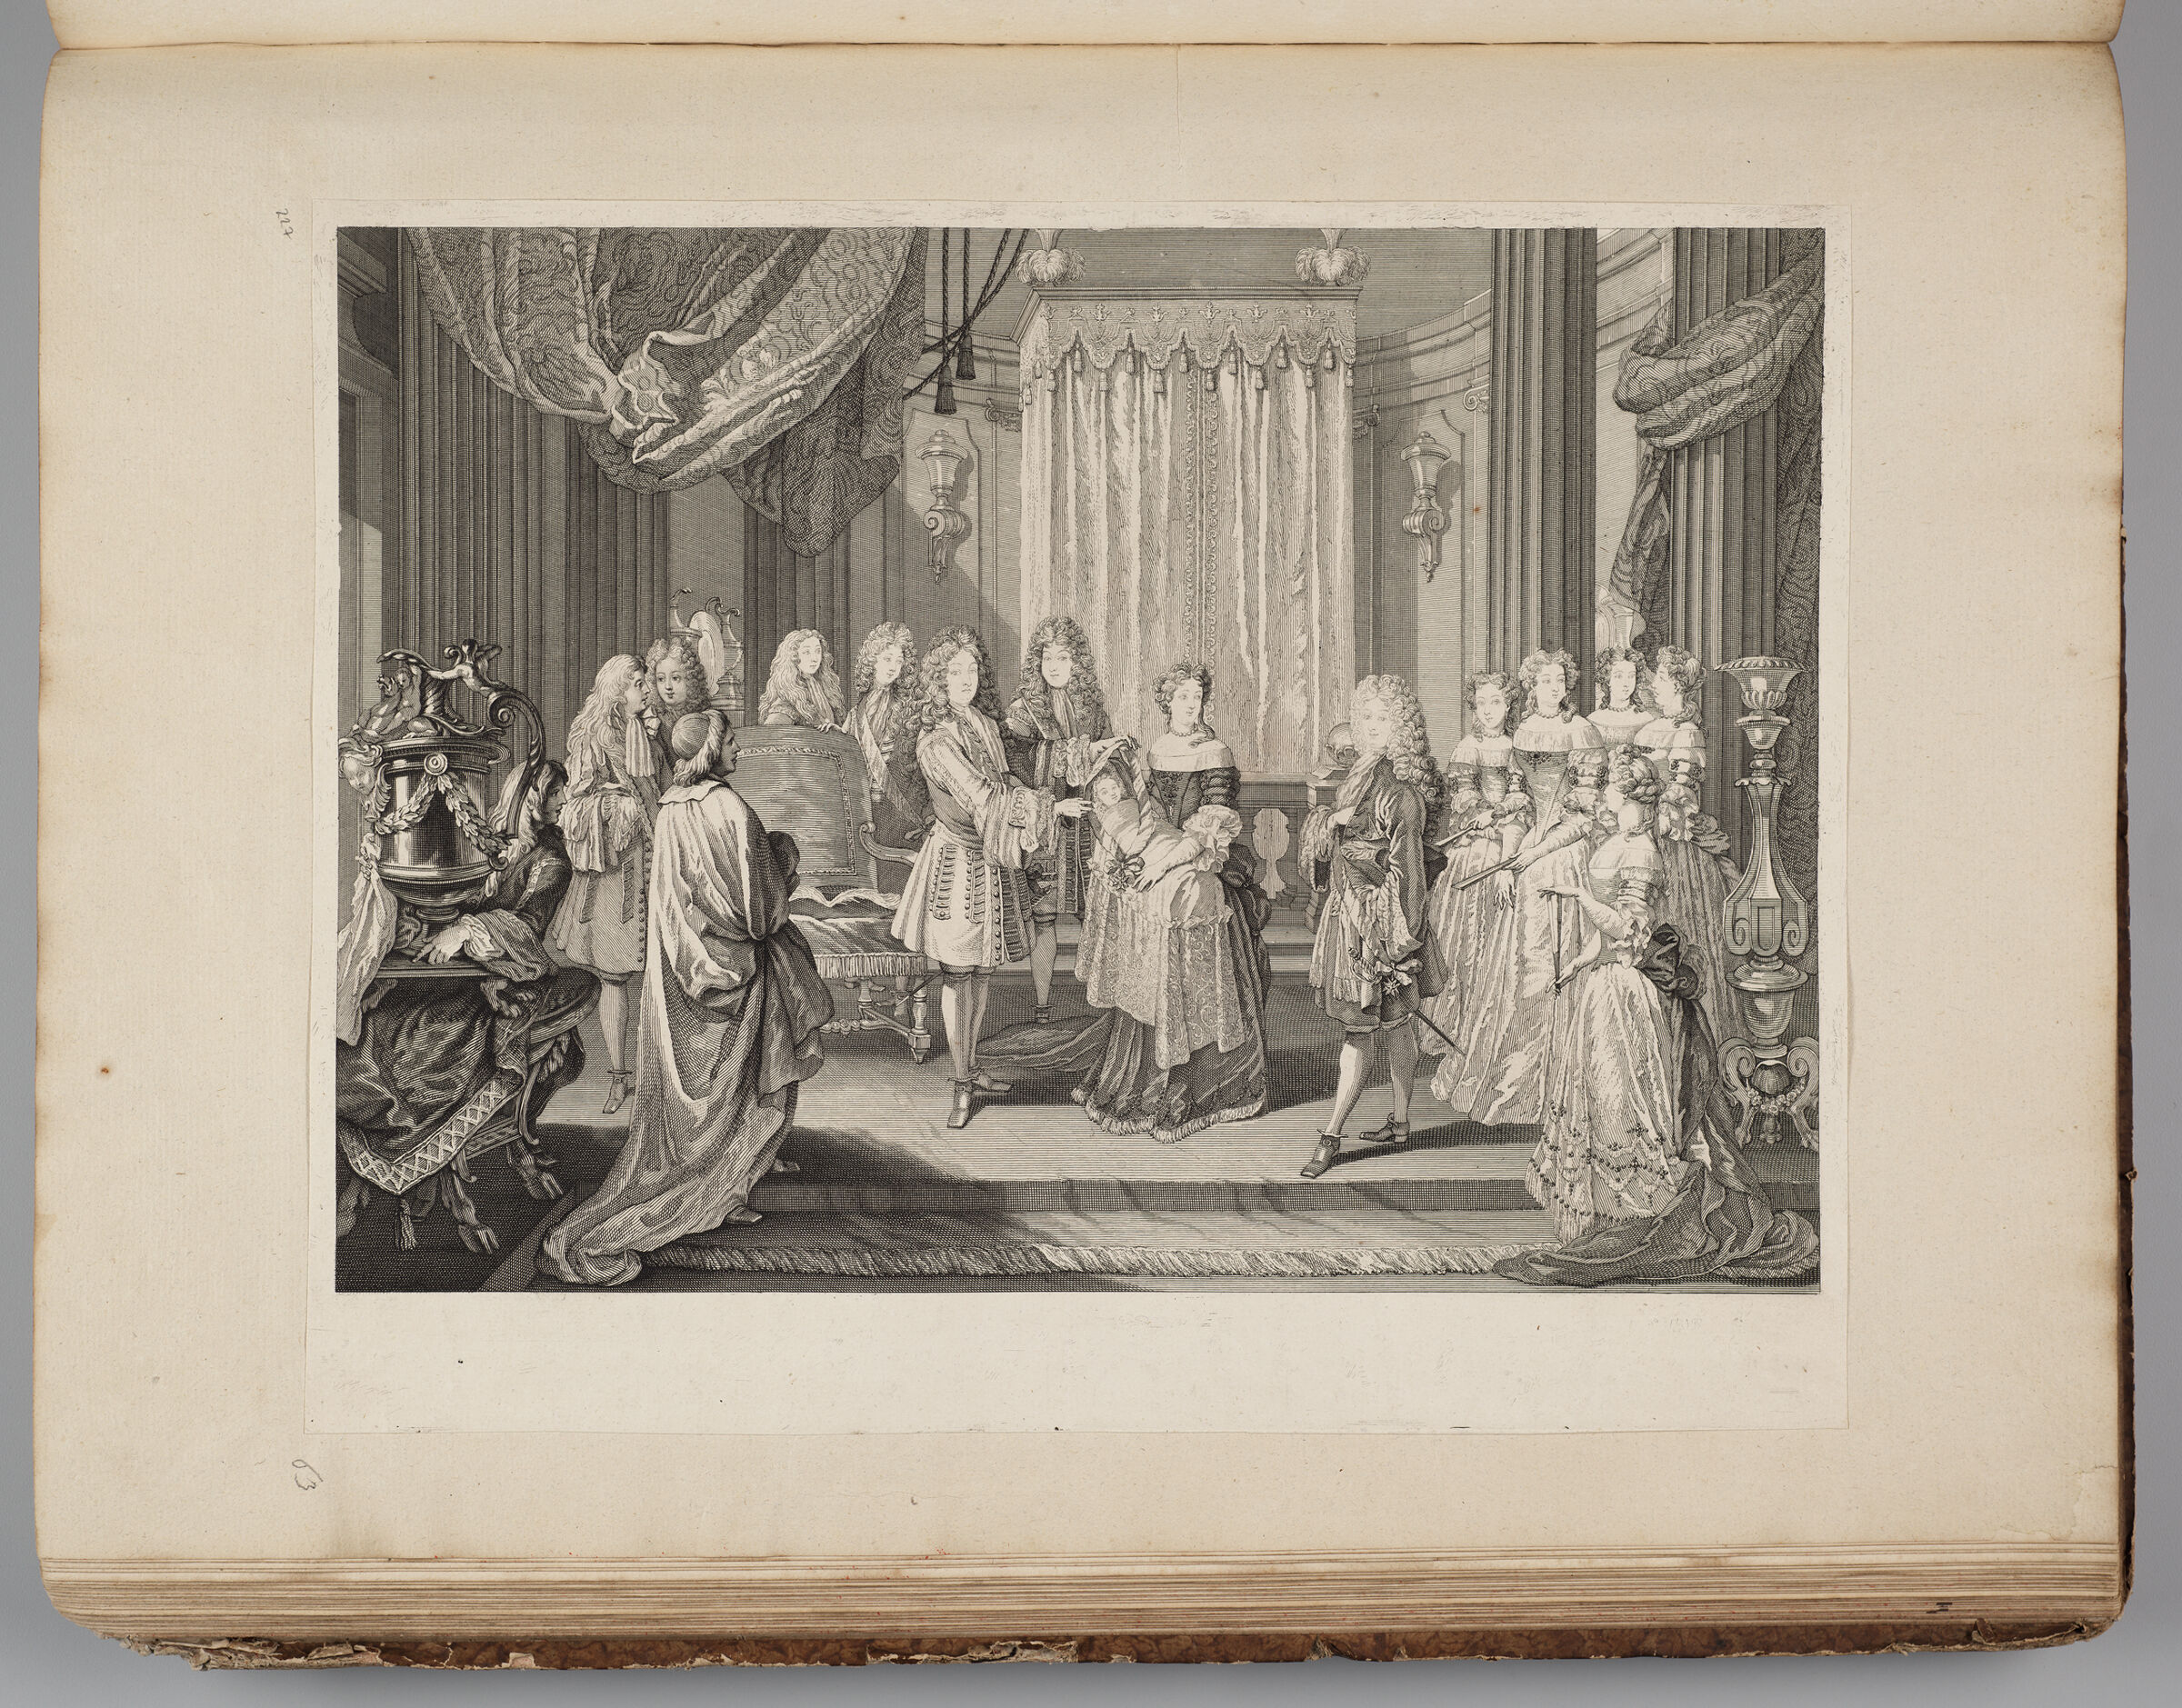 Louis Xiv Awarding The Blue Ribbon Of The Order Of The Holy Spirit To The Duke Of Burgundy, Father Of Louis Xv, The Reigning King Of France